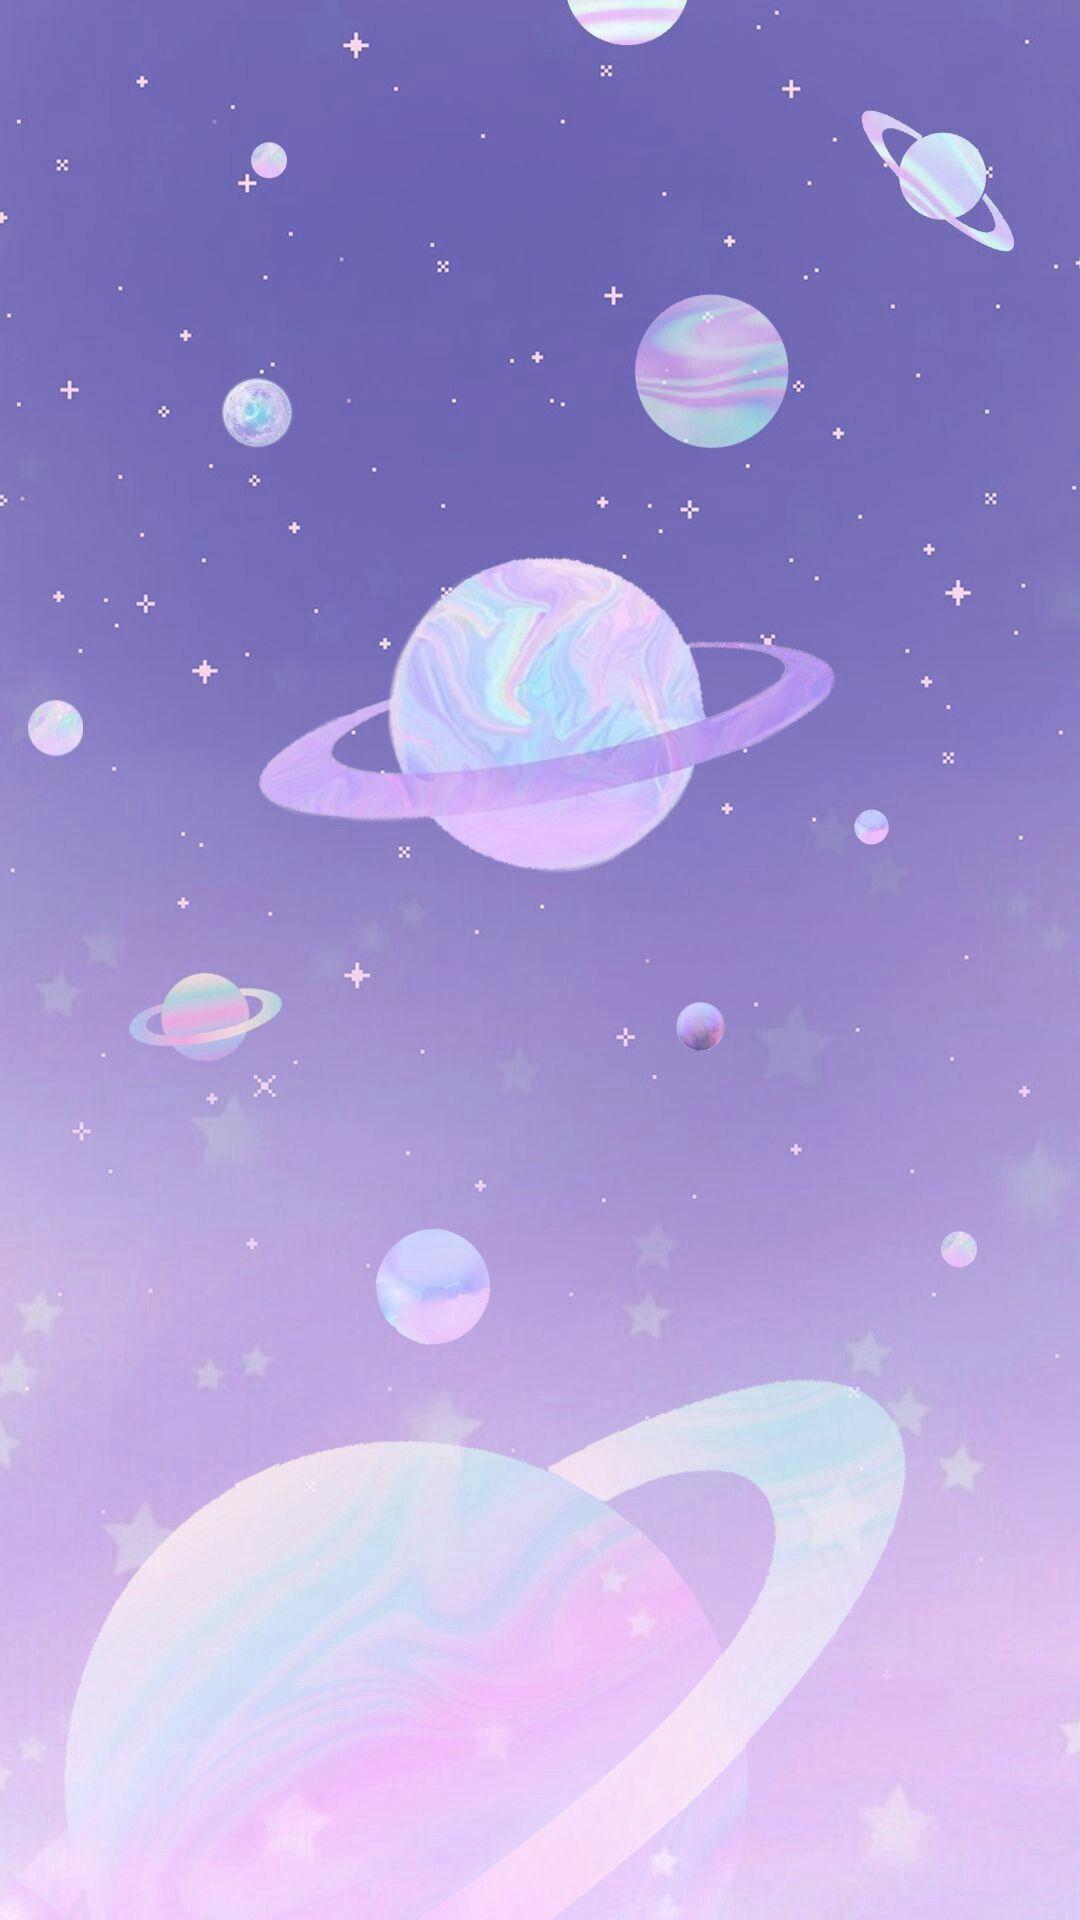 Wallpapers  Space iphone wallpaper Iphone wallpaper Aesthetic iphone  wallpaper